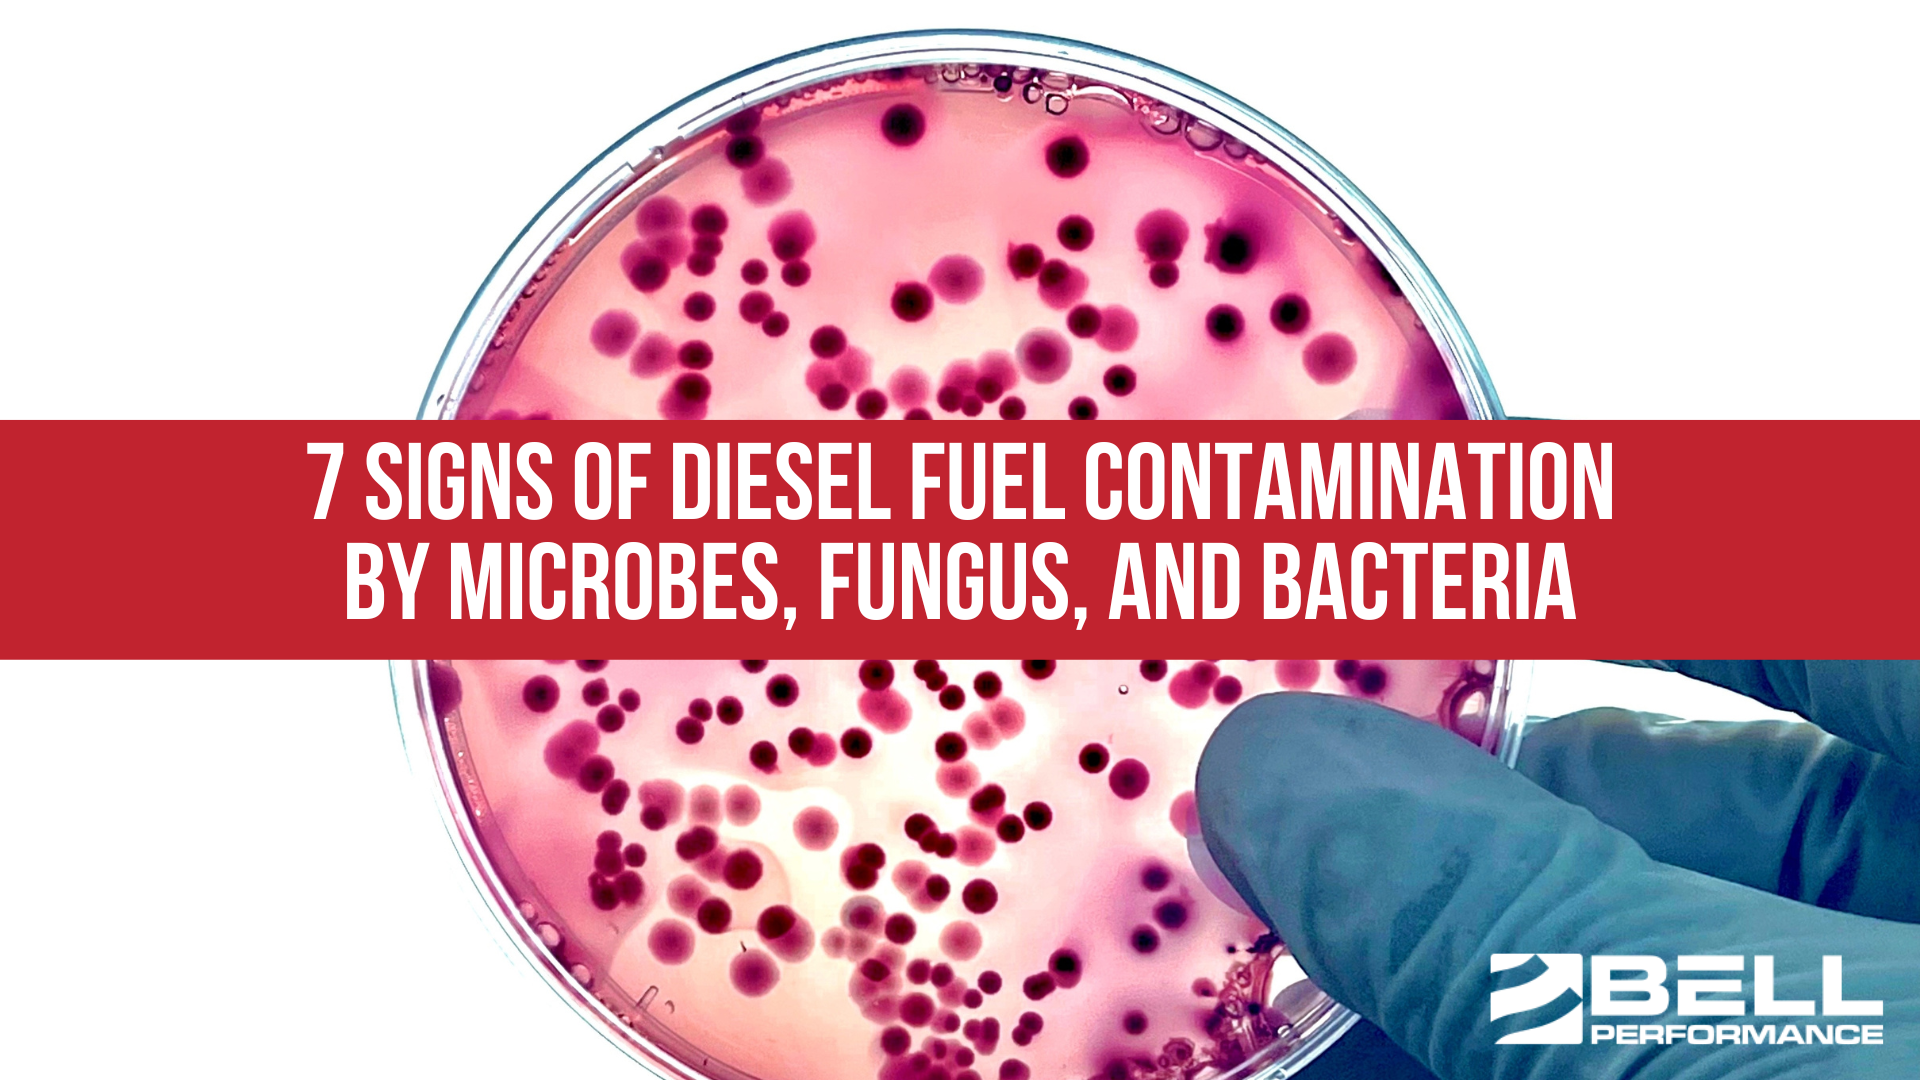 7 Signs of Diesel Fuel Contamination by Microbes, Fungus, and Bacteria